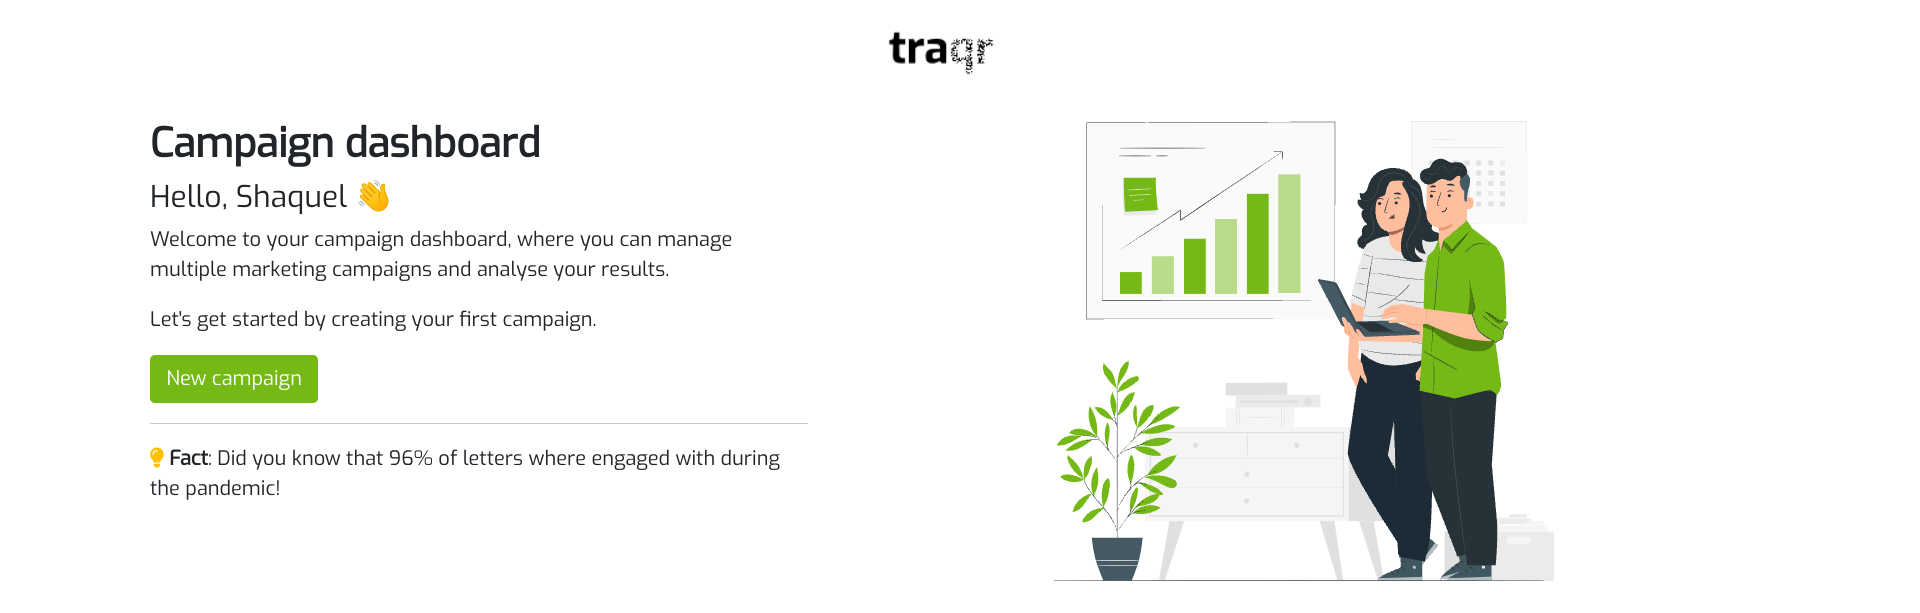 track brouchure analytics with traqr